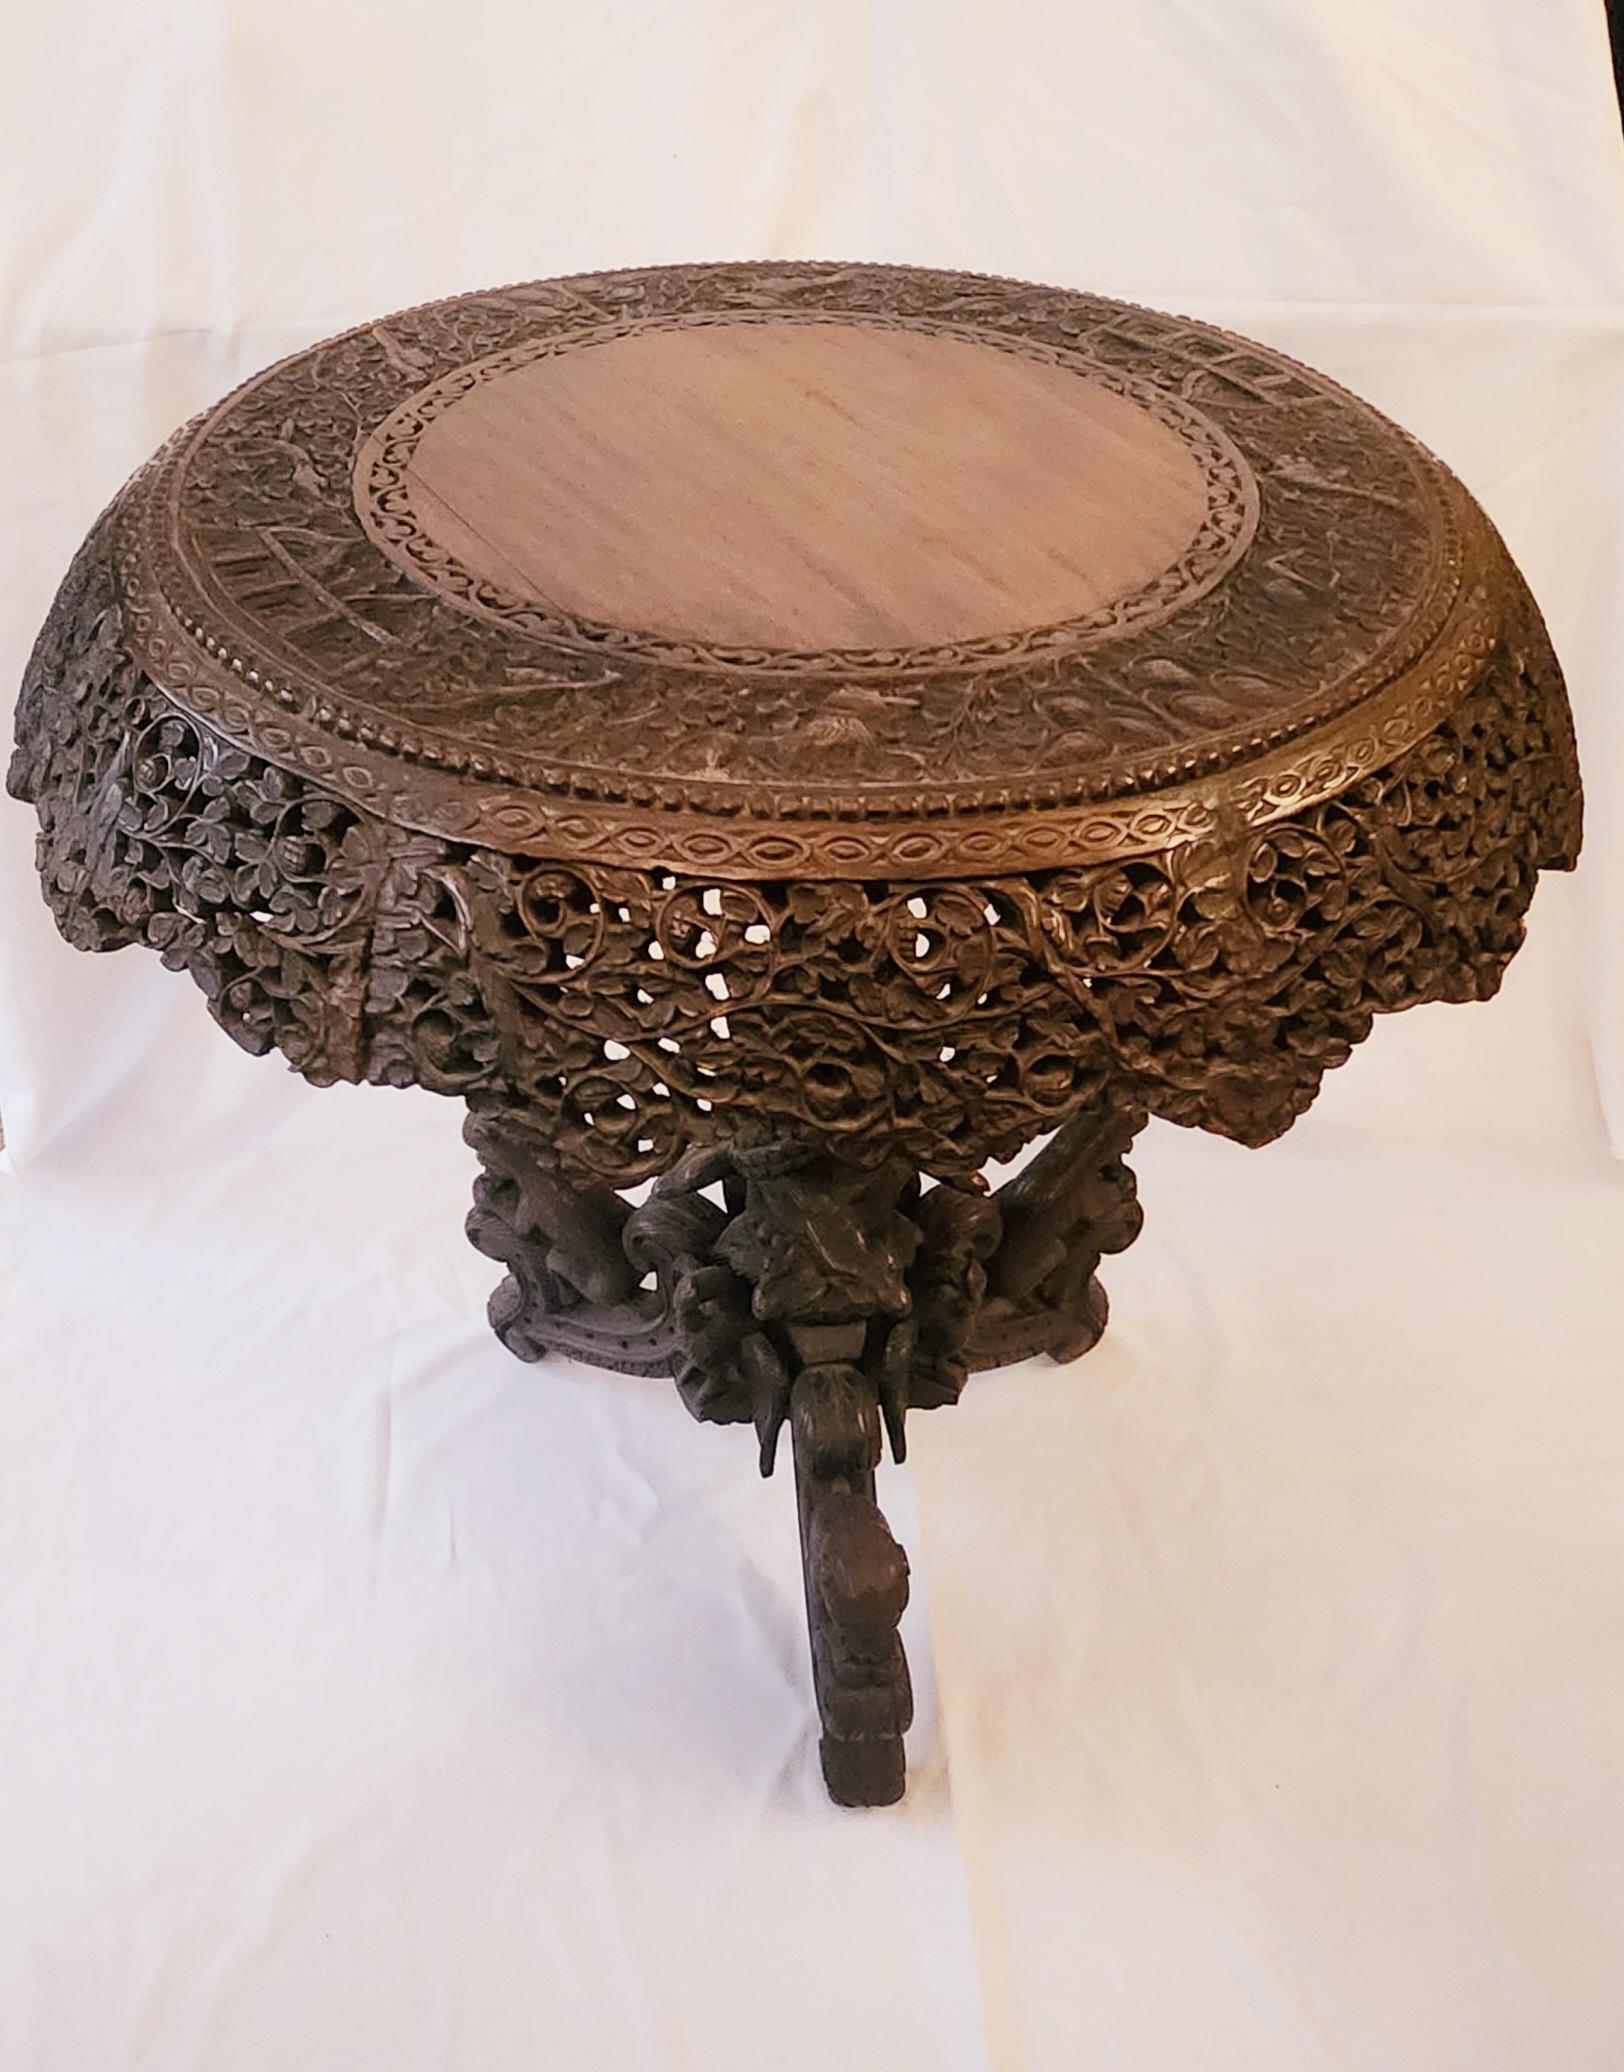 This antique Anglo-Indian rosewood carved center table from the 19th century is a true masterpiece. It features exquisite craftsmanship and intricate detailing, showcasing the rich cultural fusion of British and Indian influences.

The table is made